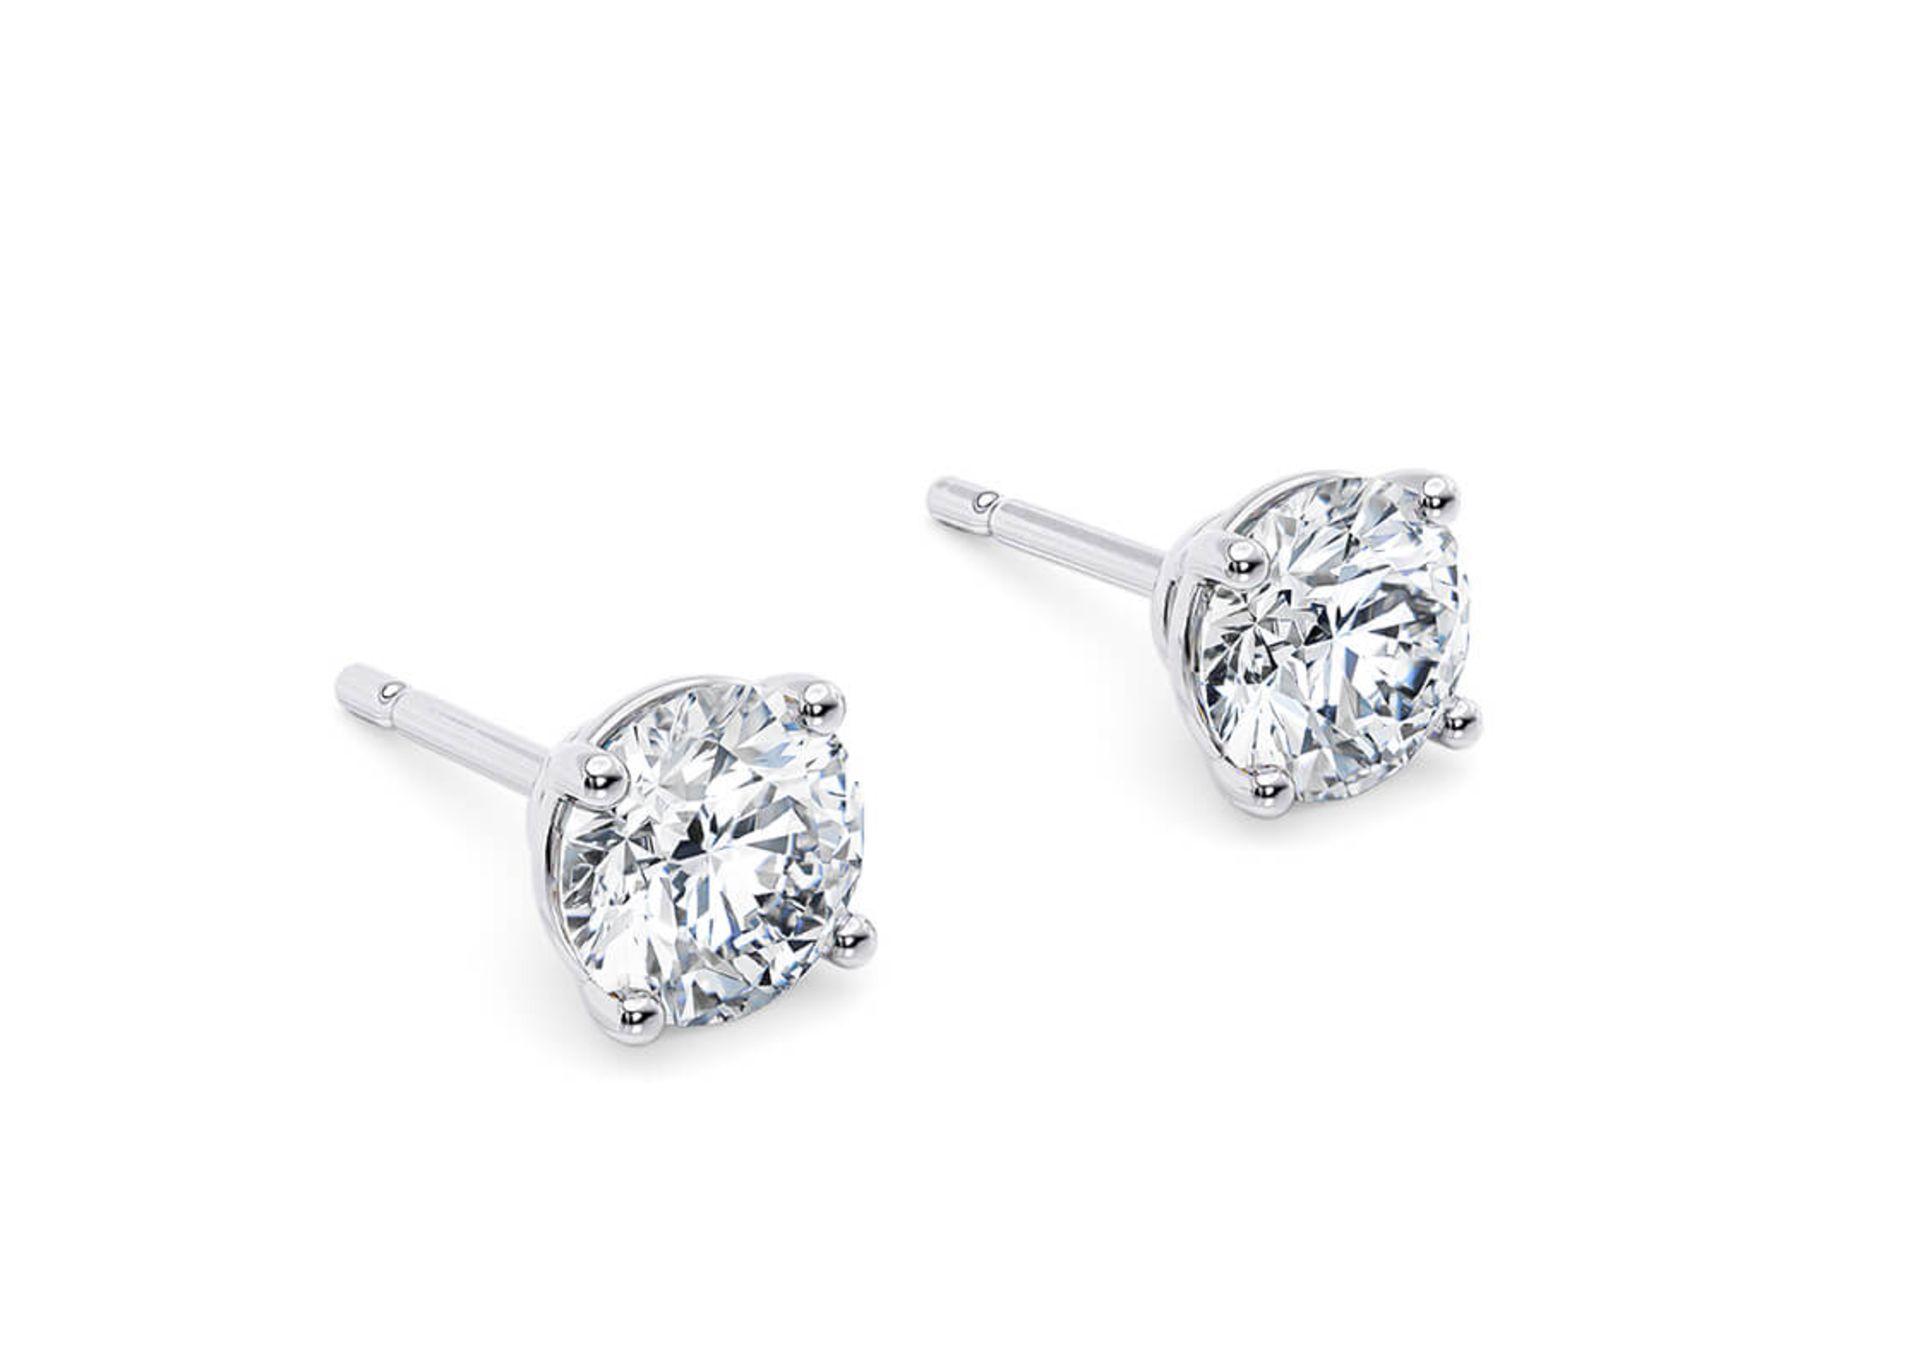 Round Brilliant Cut 2.00 Carat Diamond Earrings Set in 18kt White Gold - D Colour VVS Clarity - GIA - Image 2 of 3